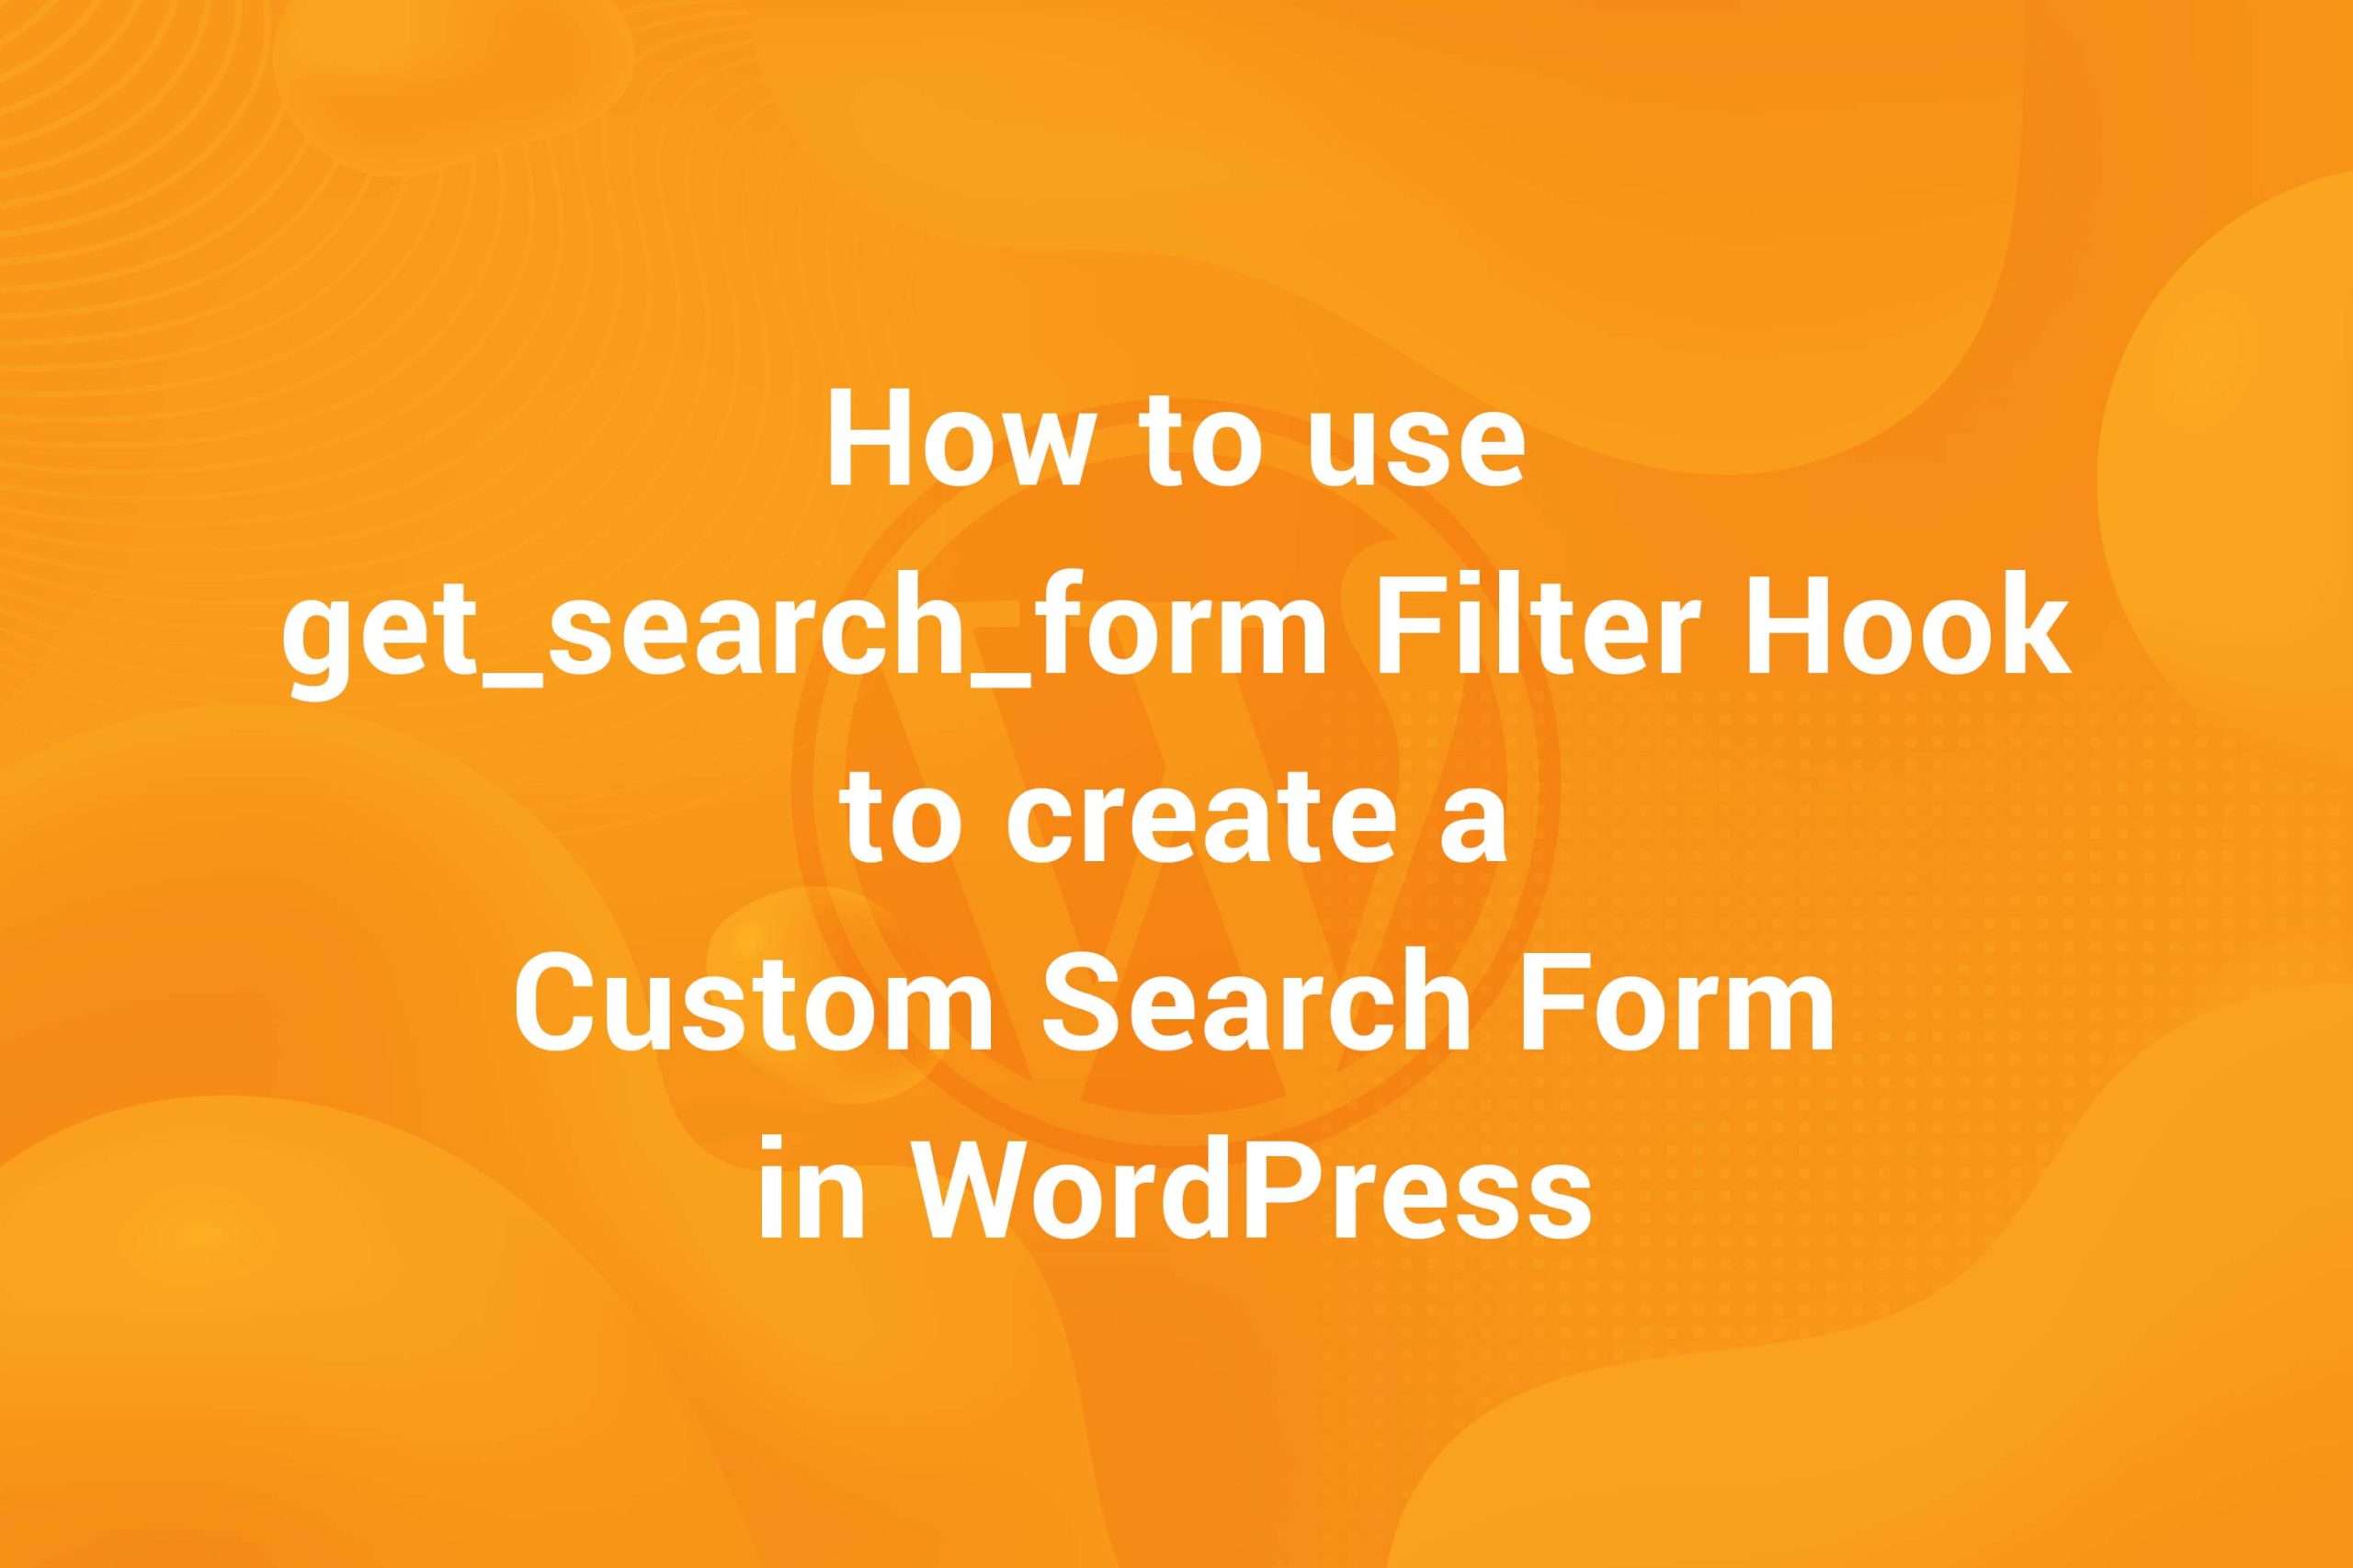 How to use get_search_form Filter Hook to create a Custom Search Form in WordPress